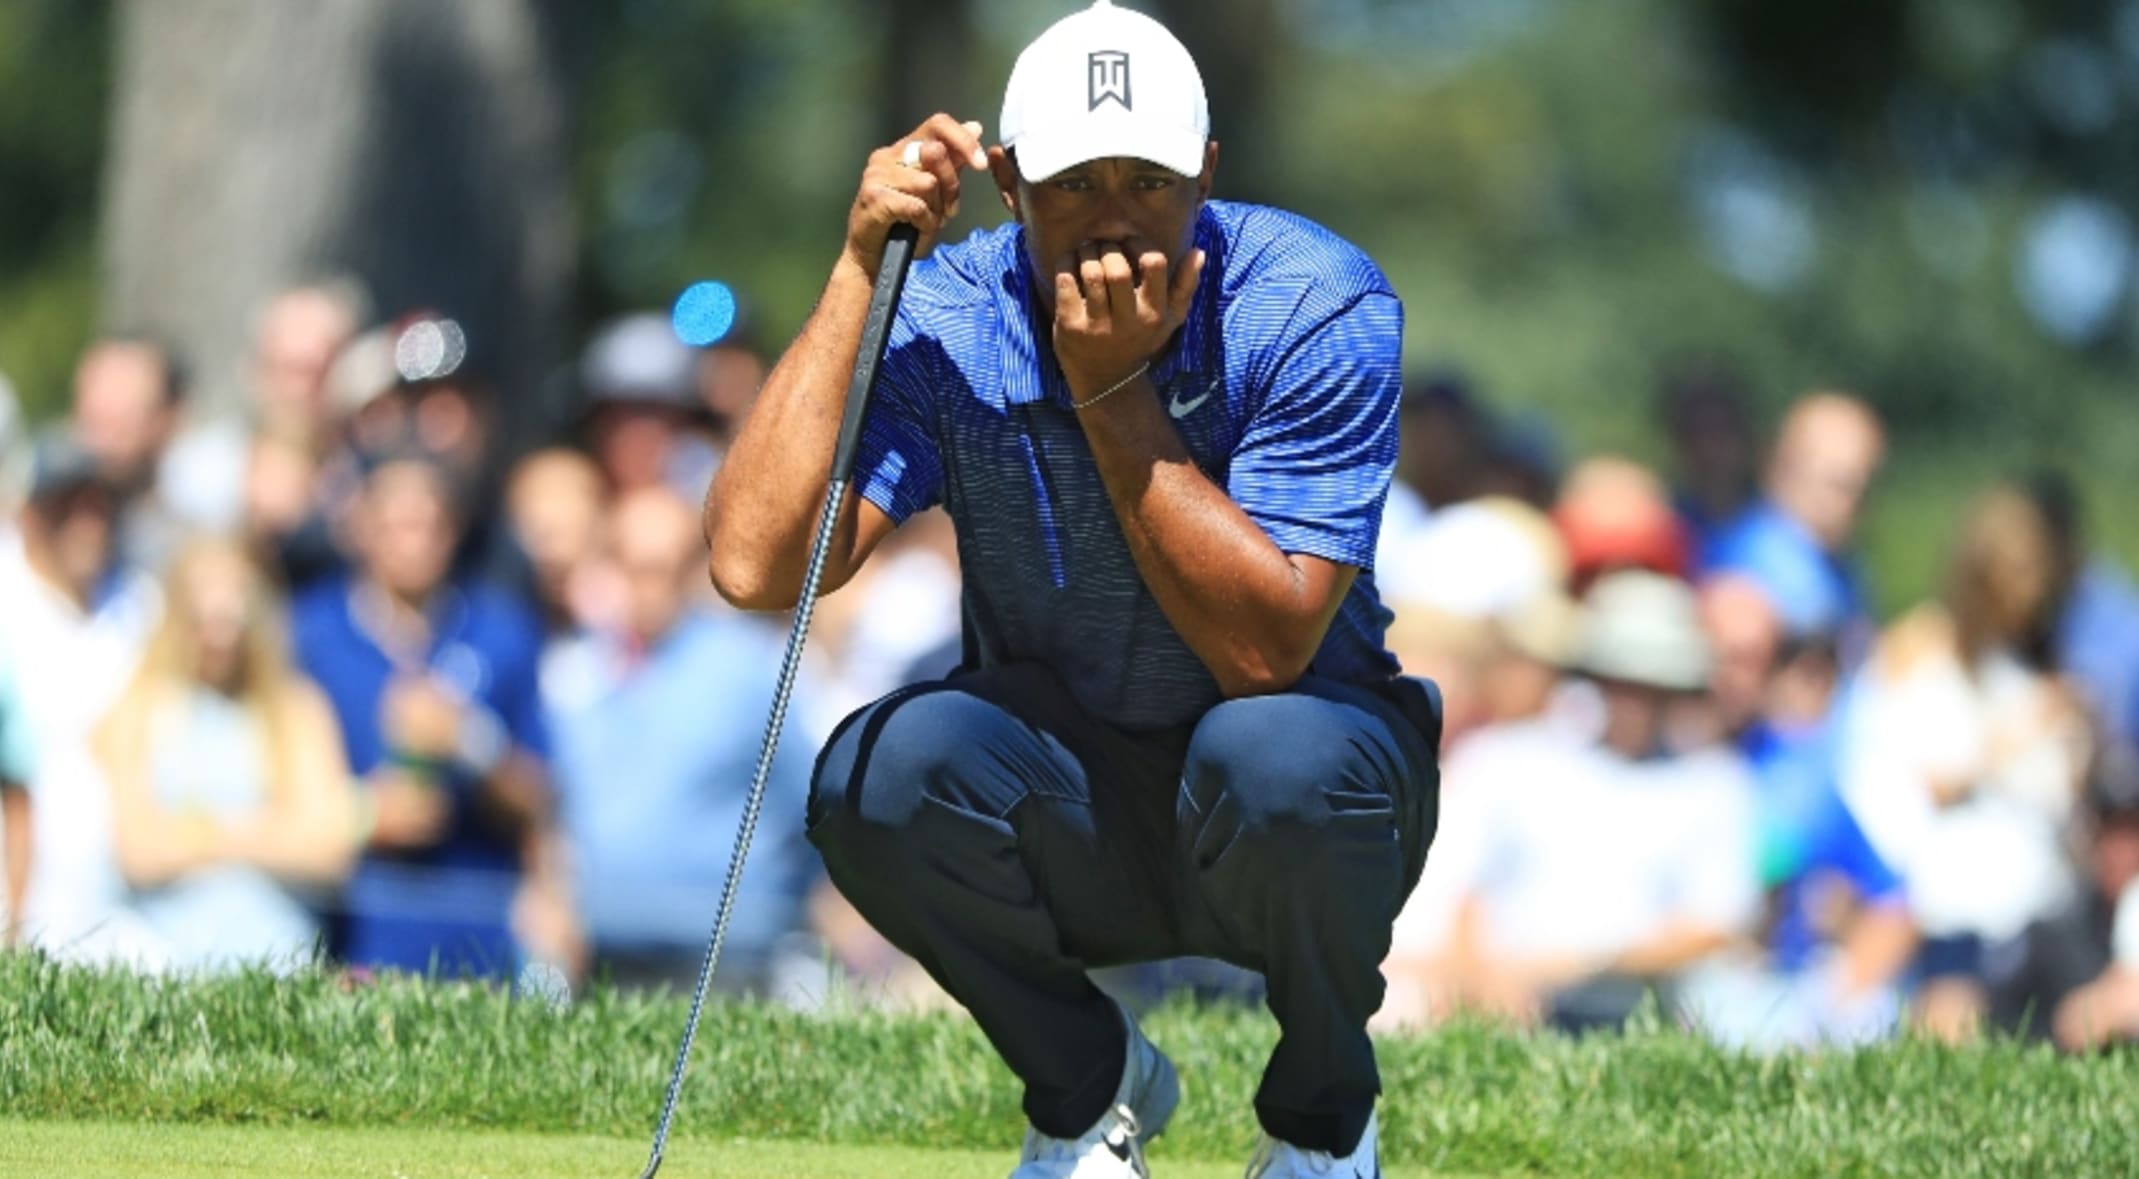 4 Way Tie For Lead At The Northern Trust As Woods Stalls